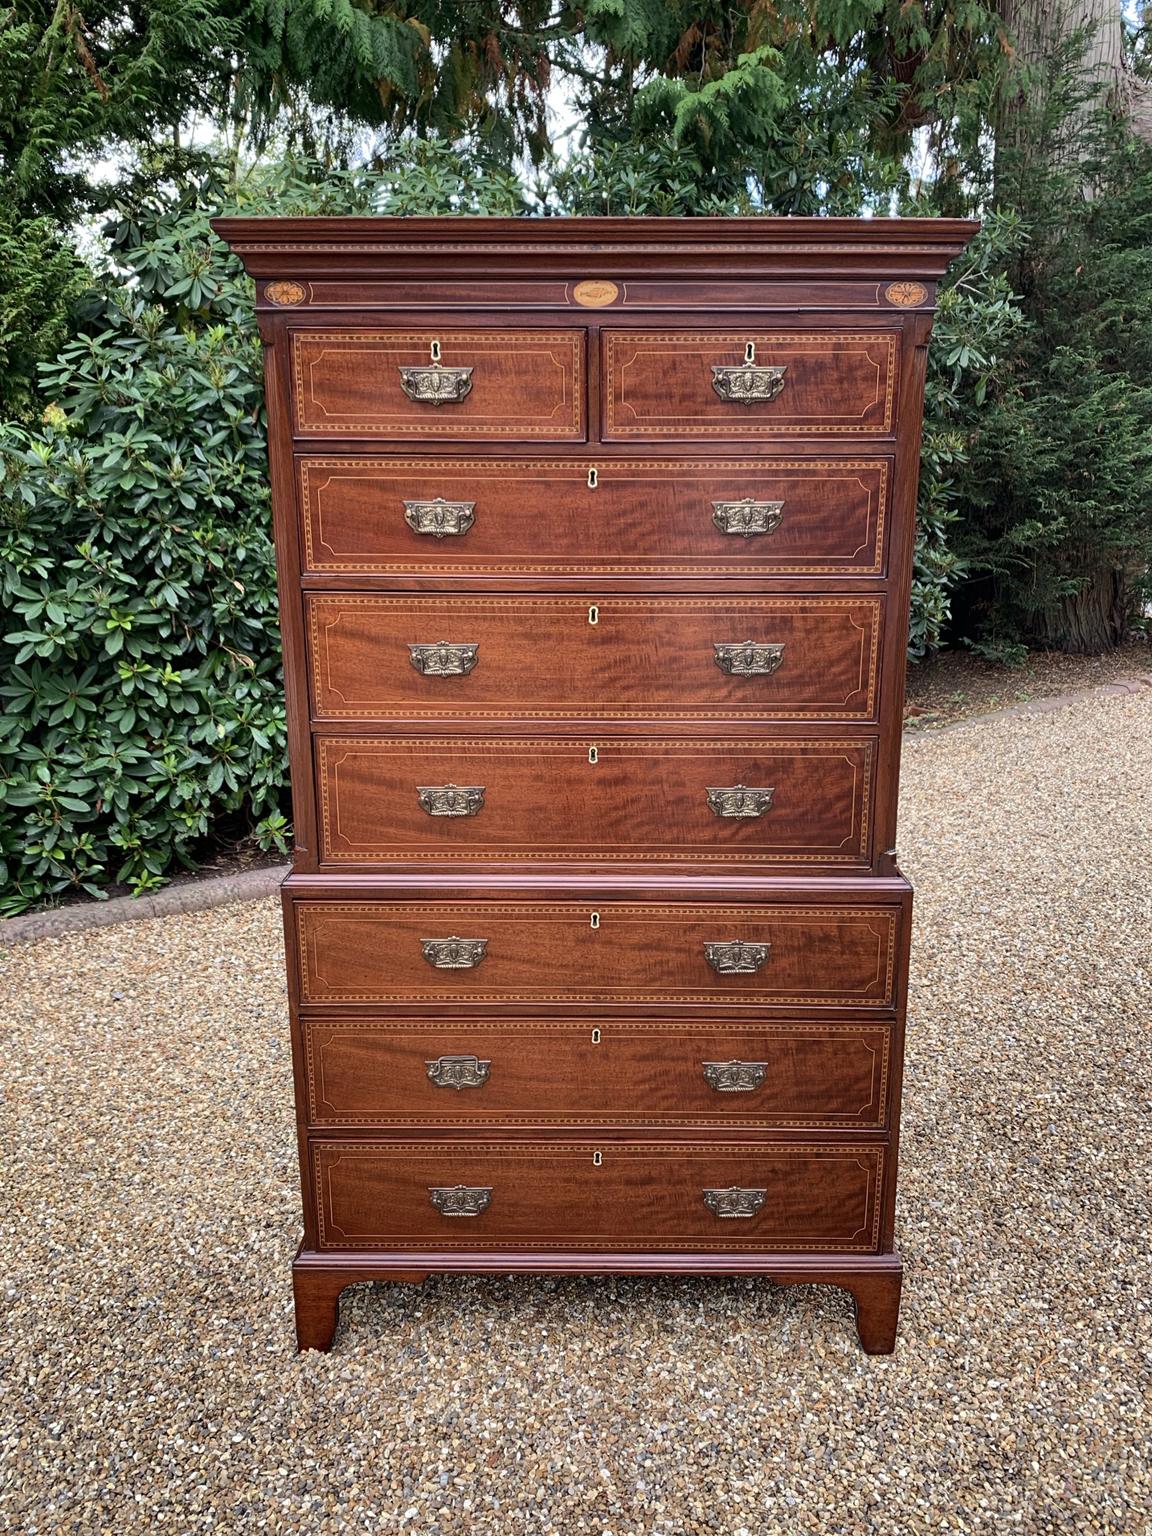 A very high quality 18th Century George III Mahogany Chest On Chest (Tallboy) Two short drawers at the top and six long solid oak lined drawers. With brass plate handles and frieze to cornice. Comes apart in two separate sections on original bracket